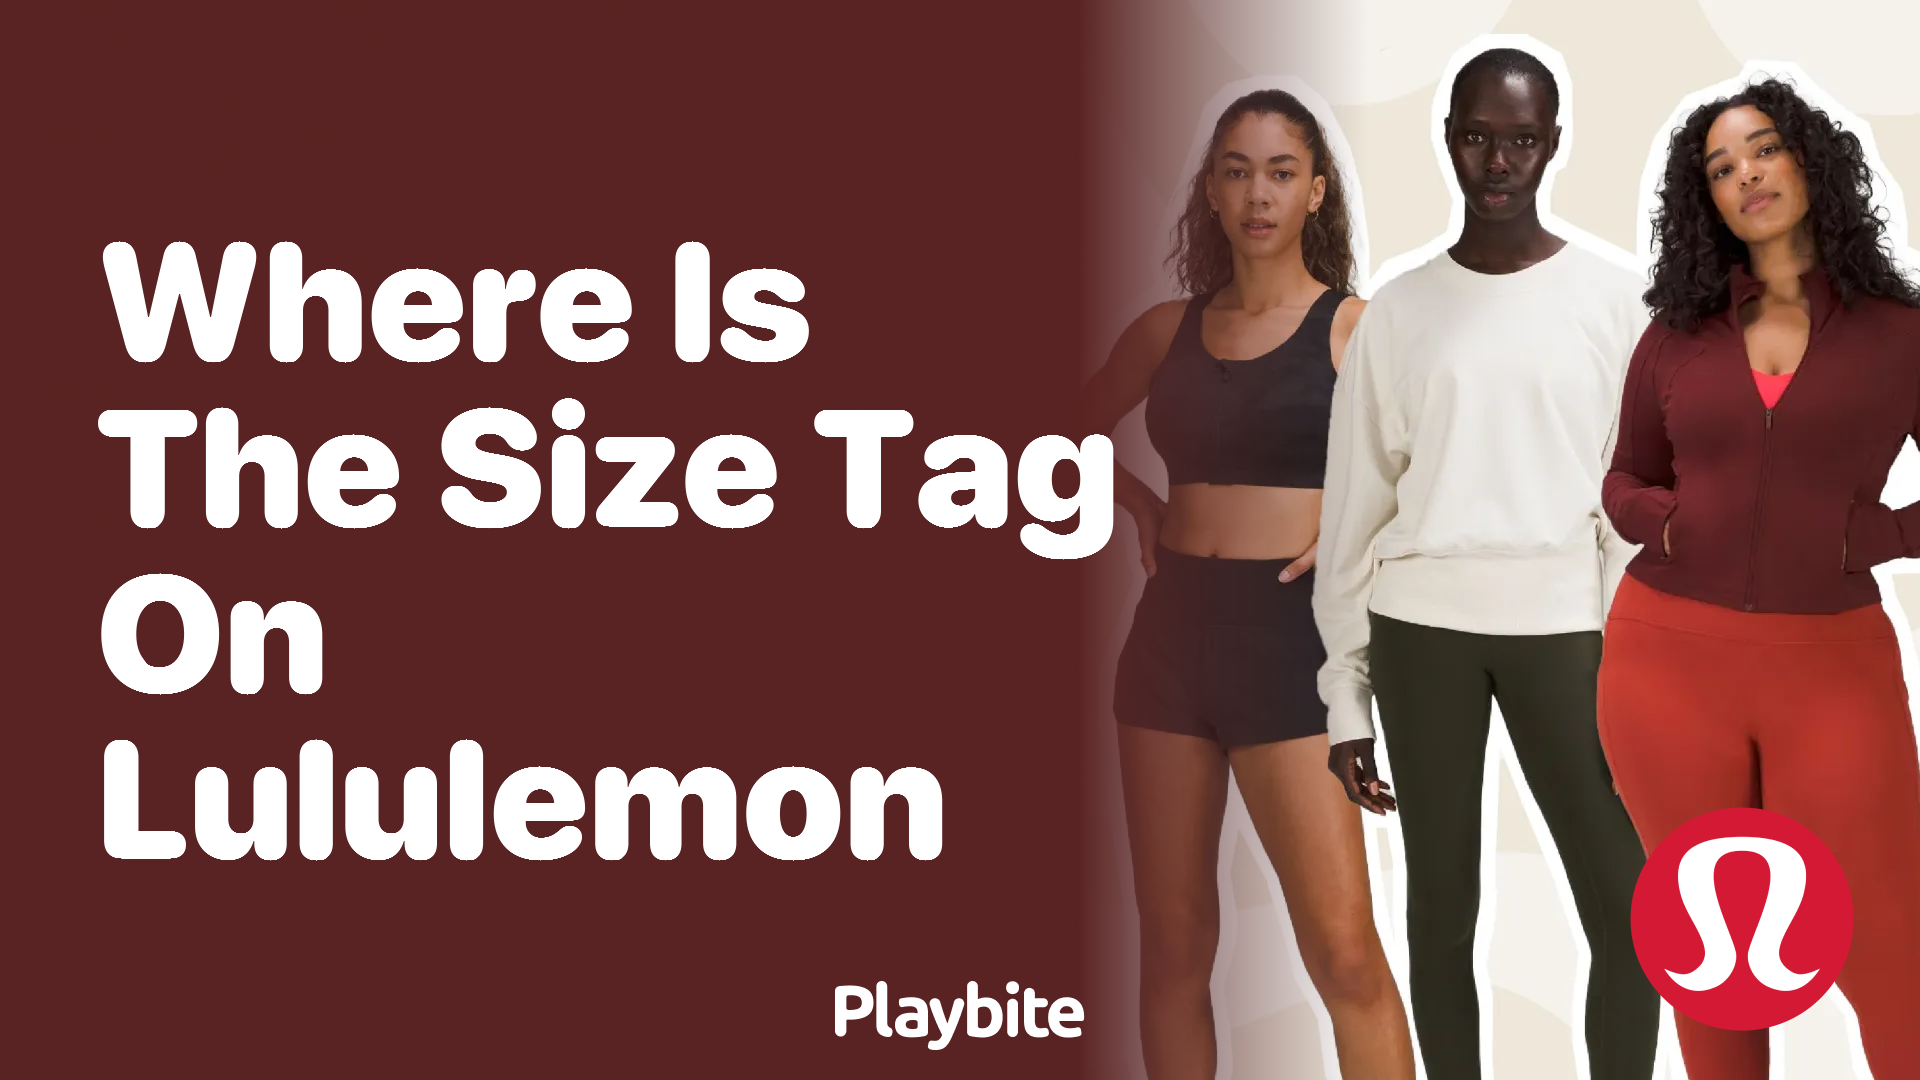 Where Is the Size Tag on Lululemon Apparel? - Playbite